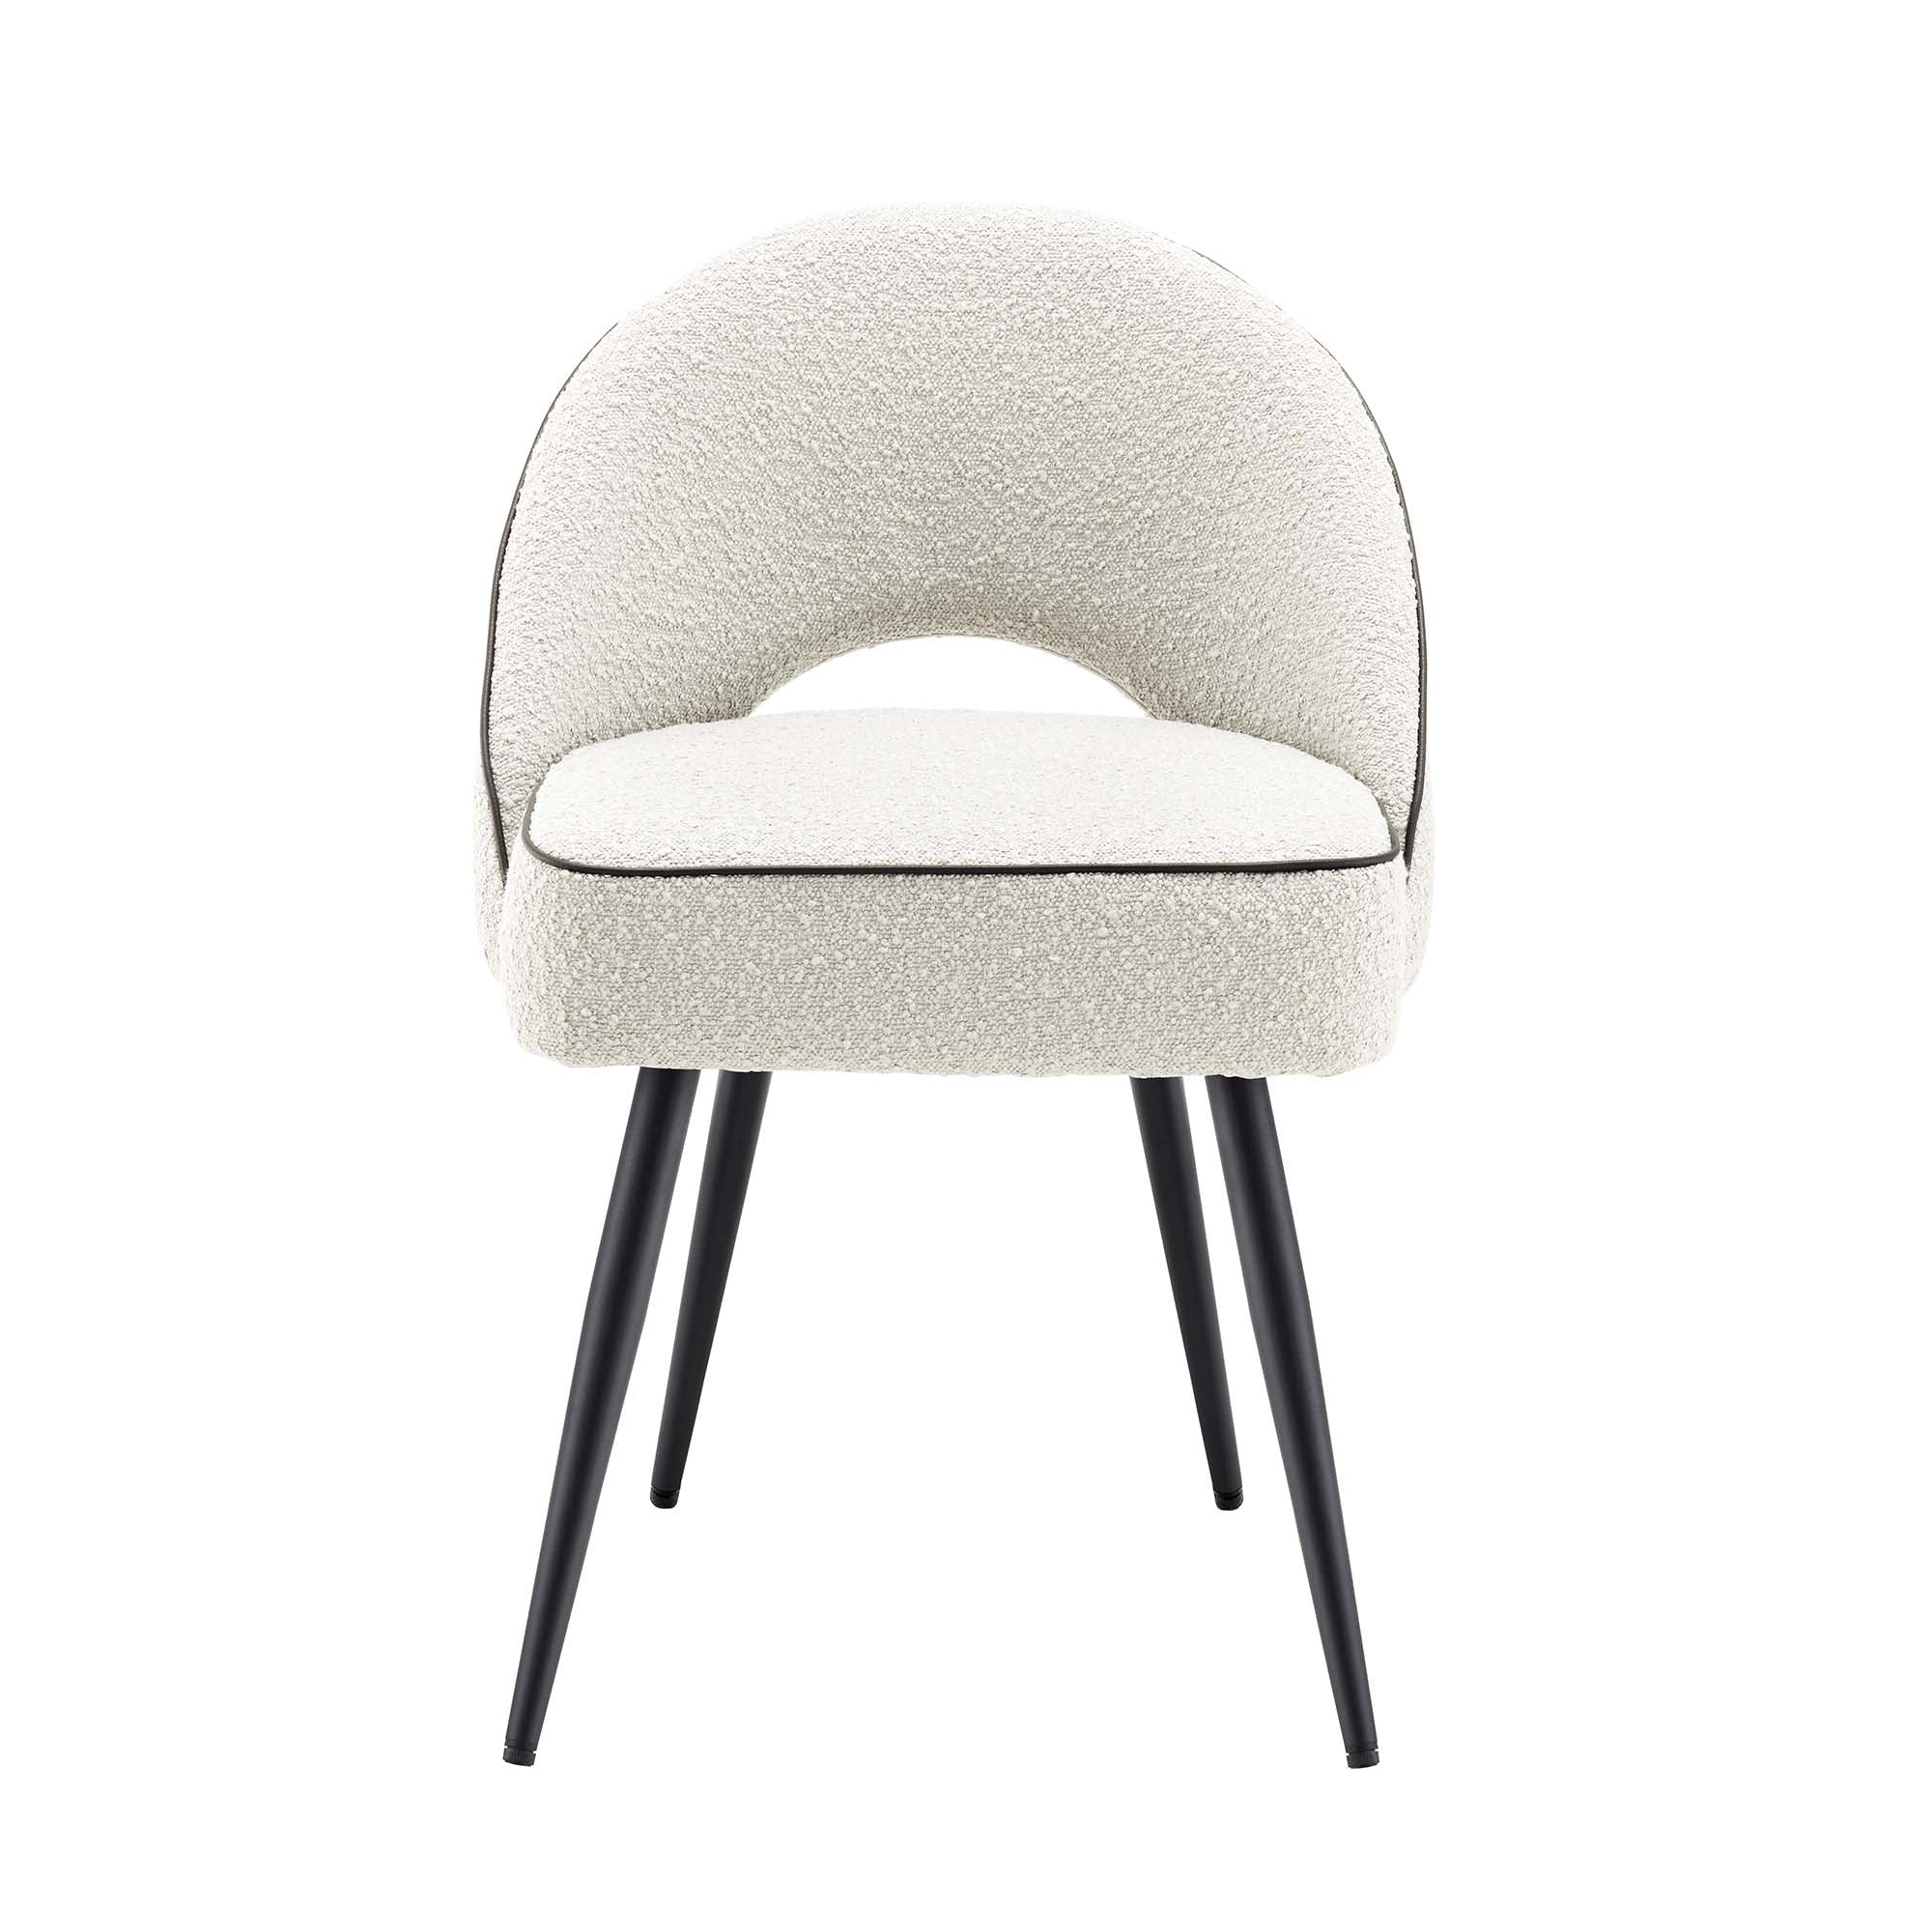 Oakley Set of 2 White Boucle Upholstered Dining Chairs with Piping